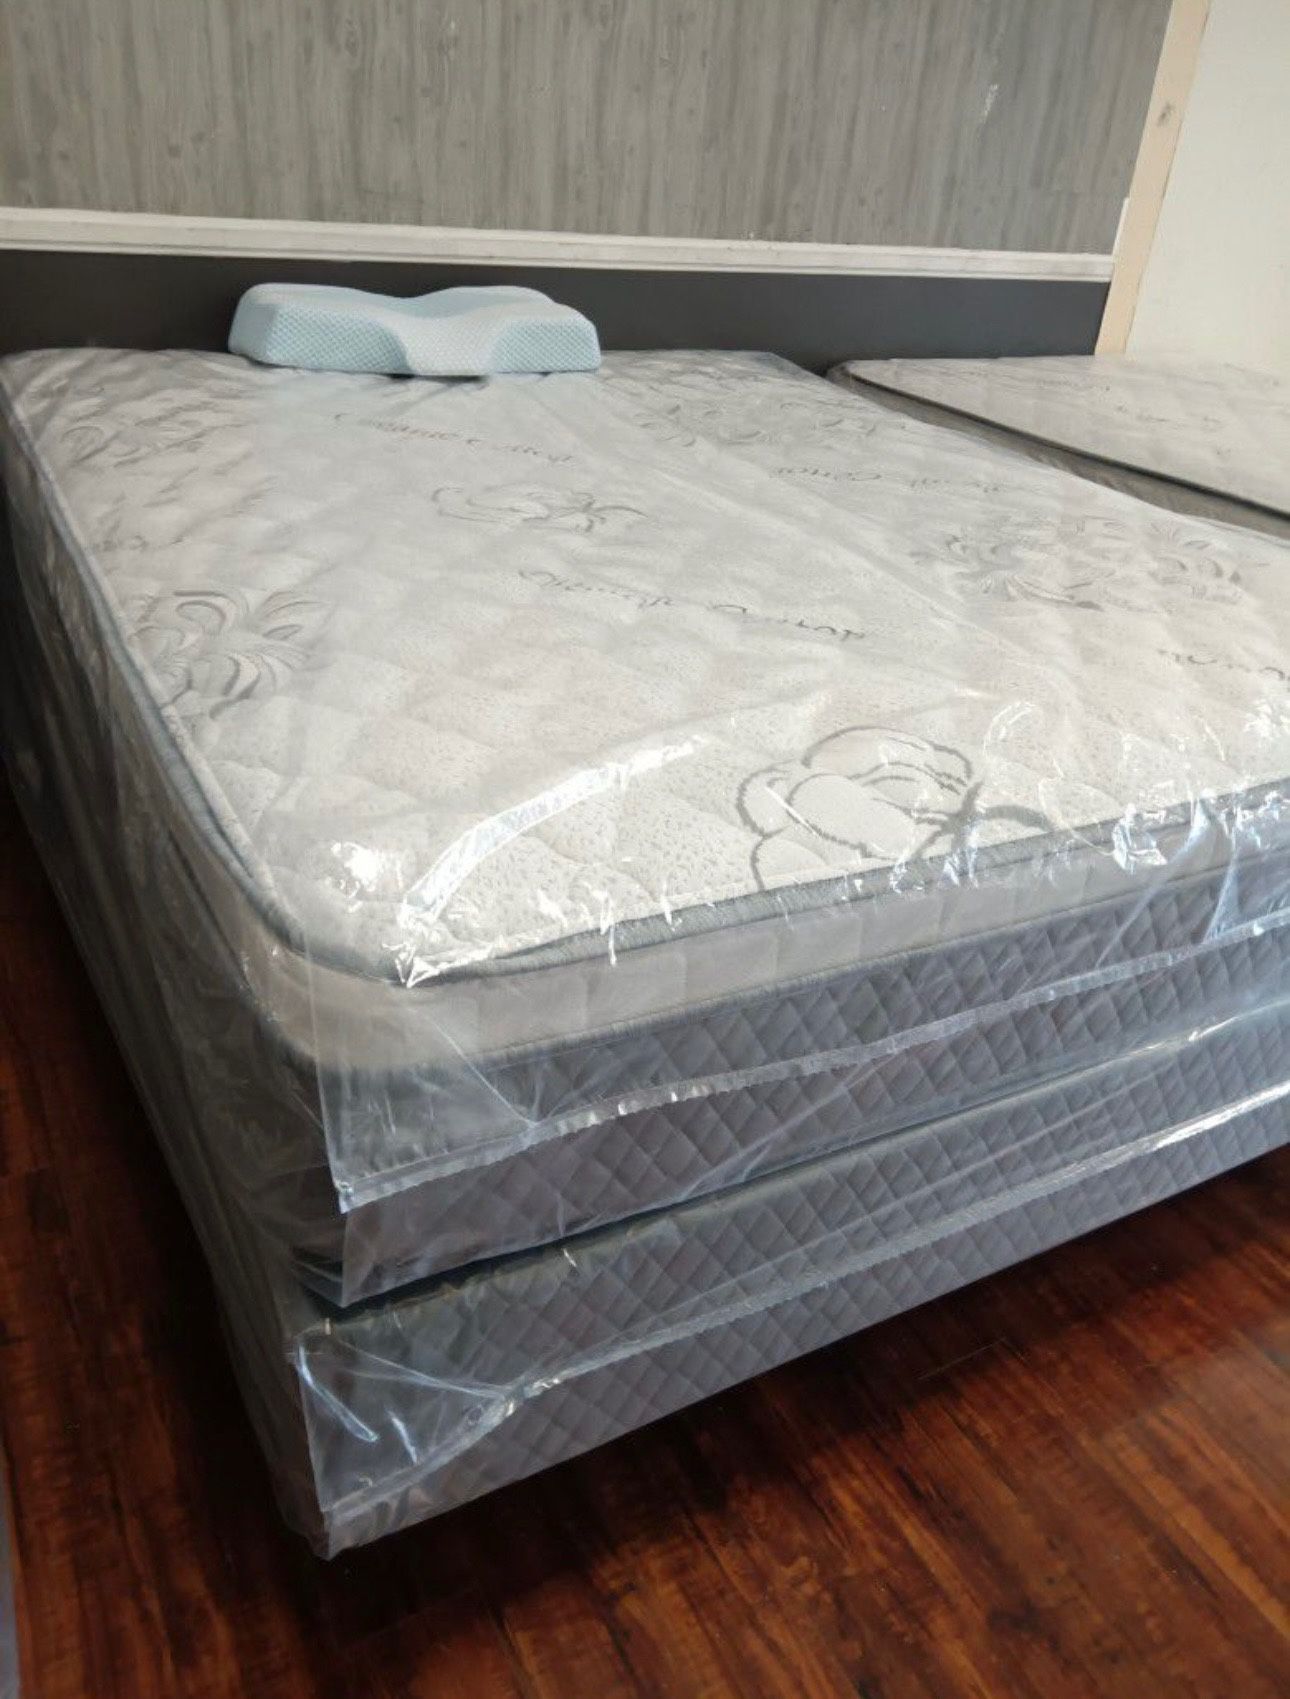 NEW 12” QUEEN PILLOWTOP MATTRESS •SAME DAY DELIVERY 